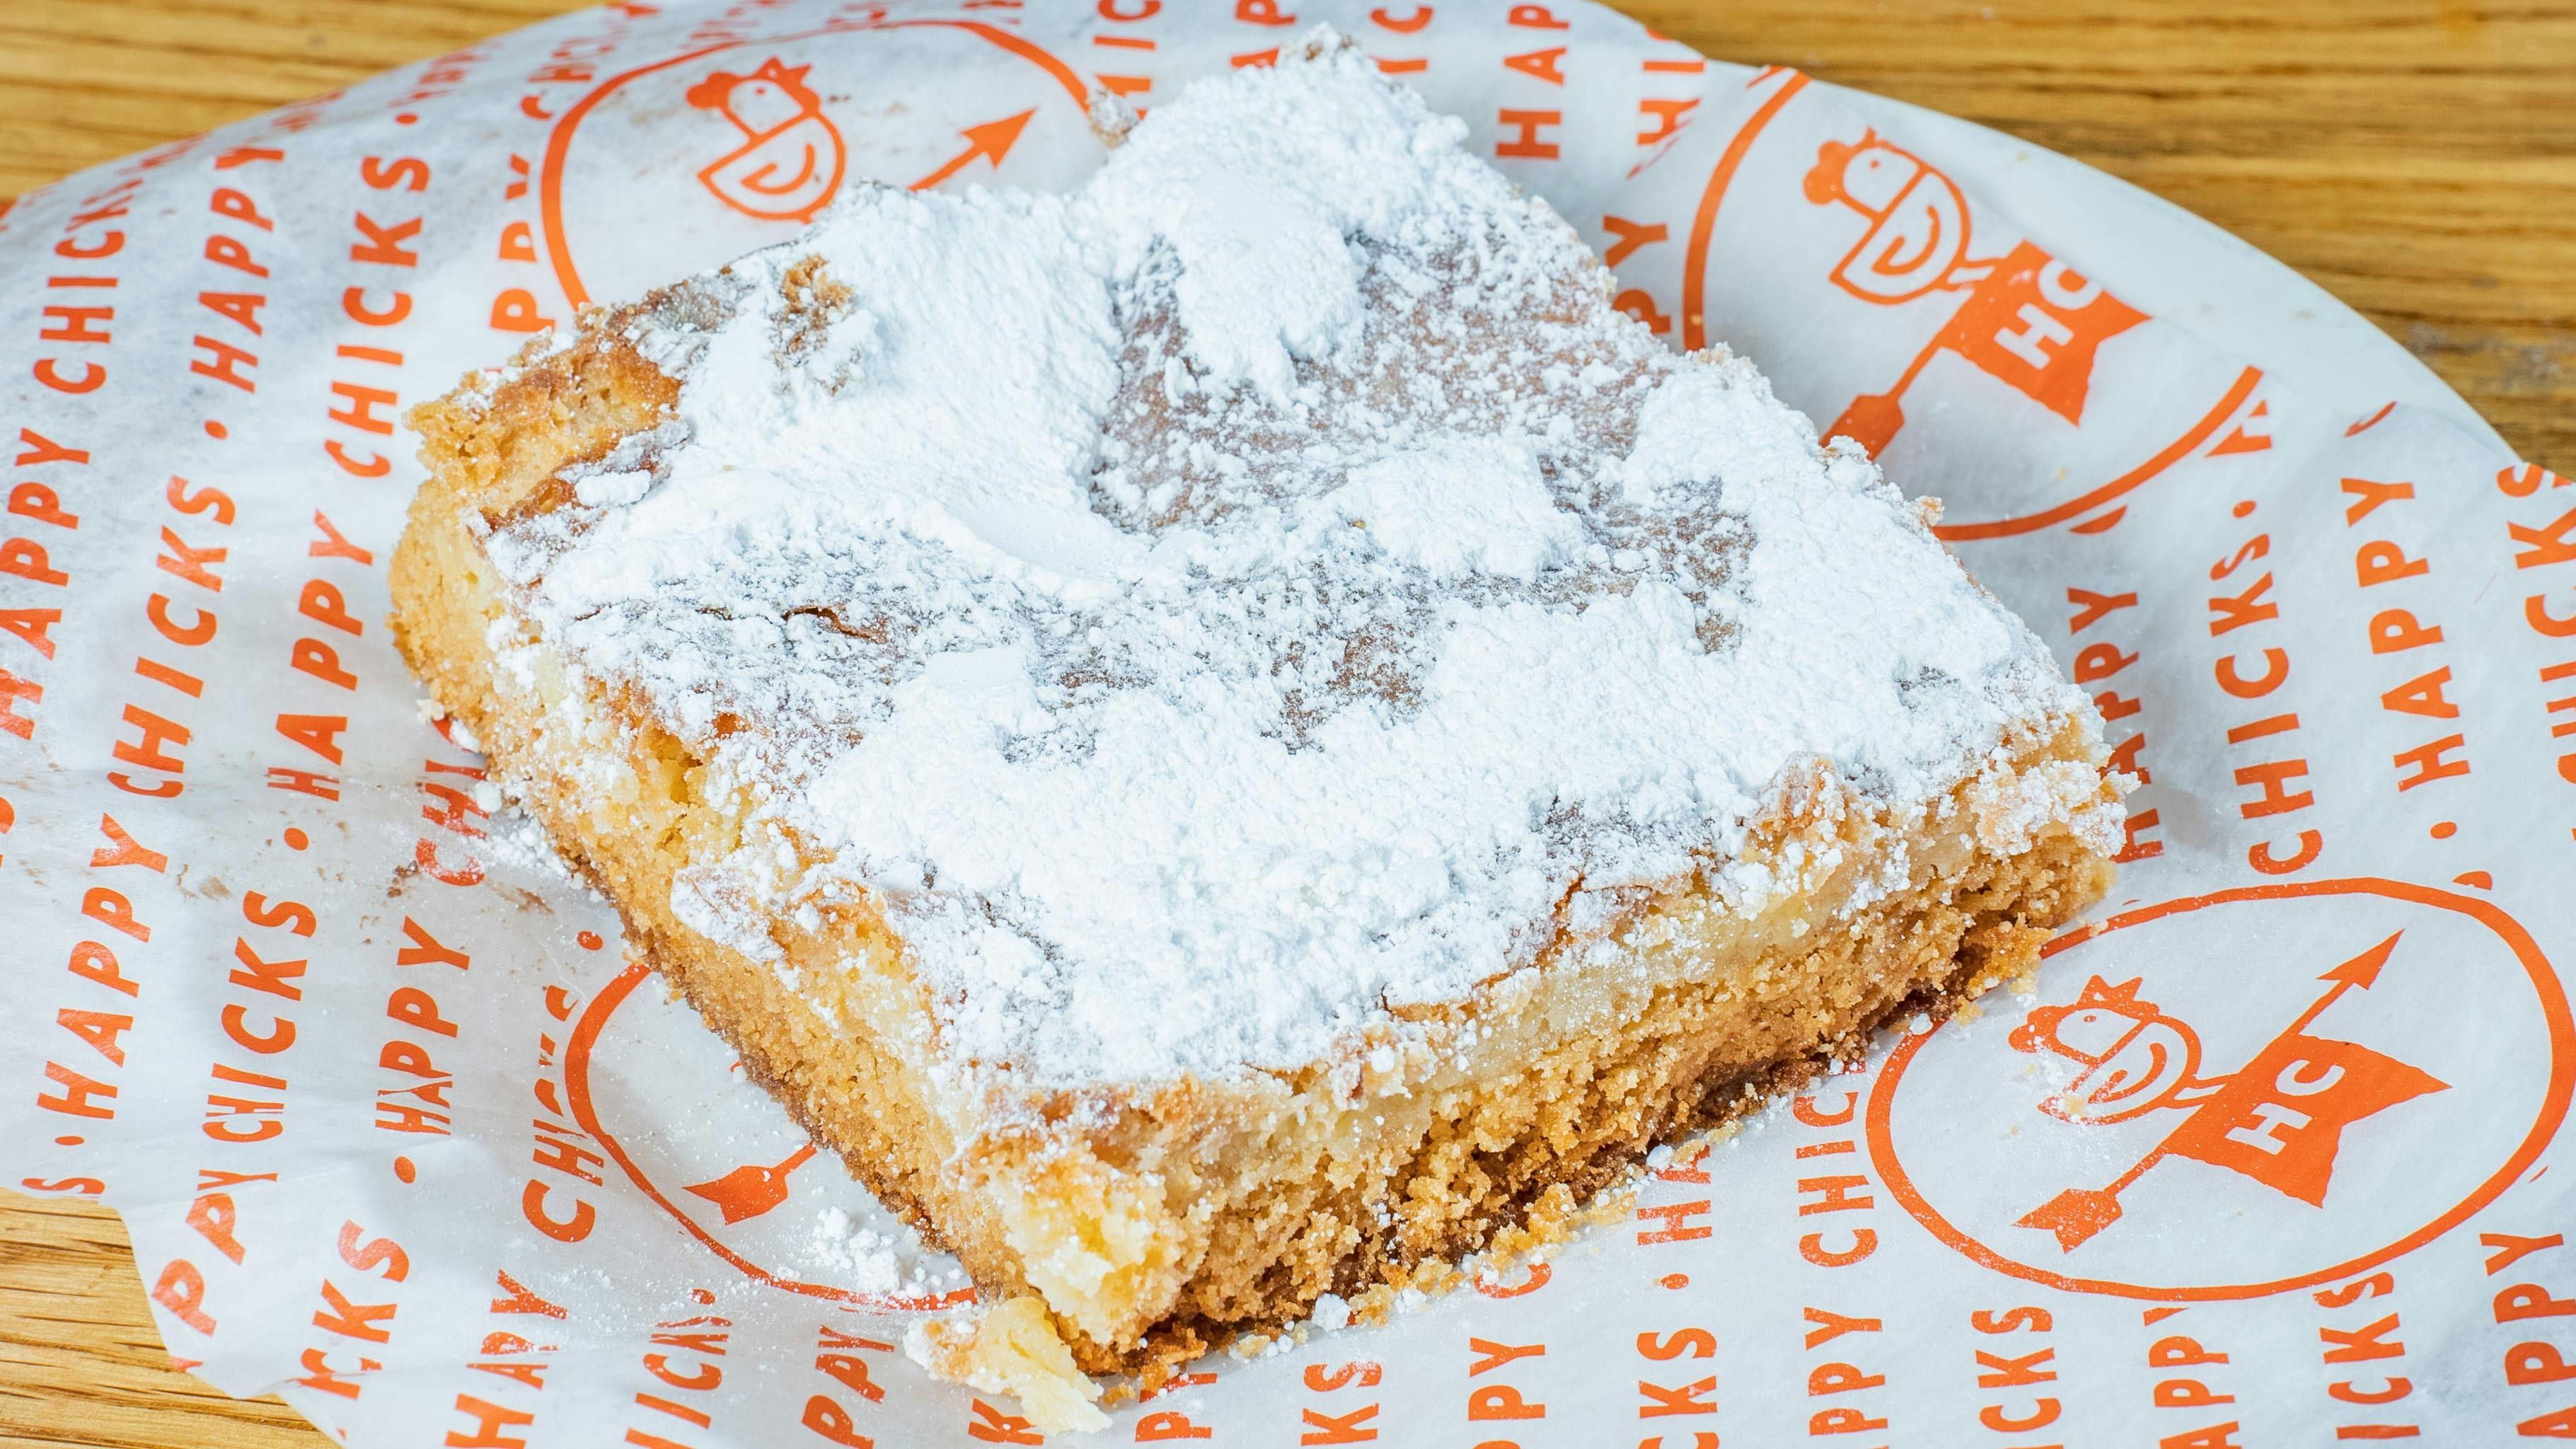 Goey Butter Cake from Happy Chicks - Research Blvd in Austin, TX